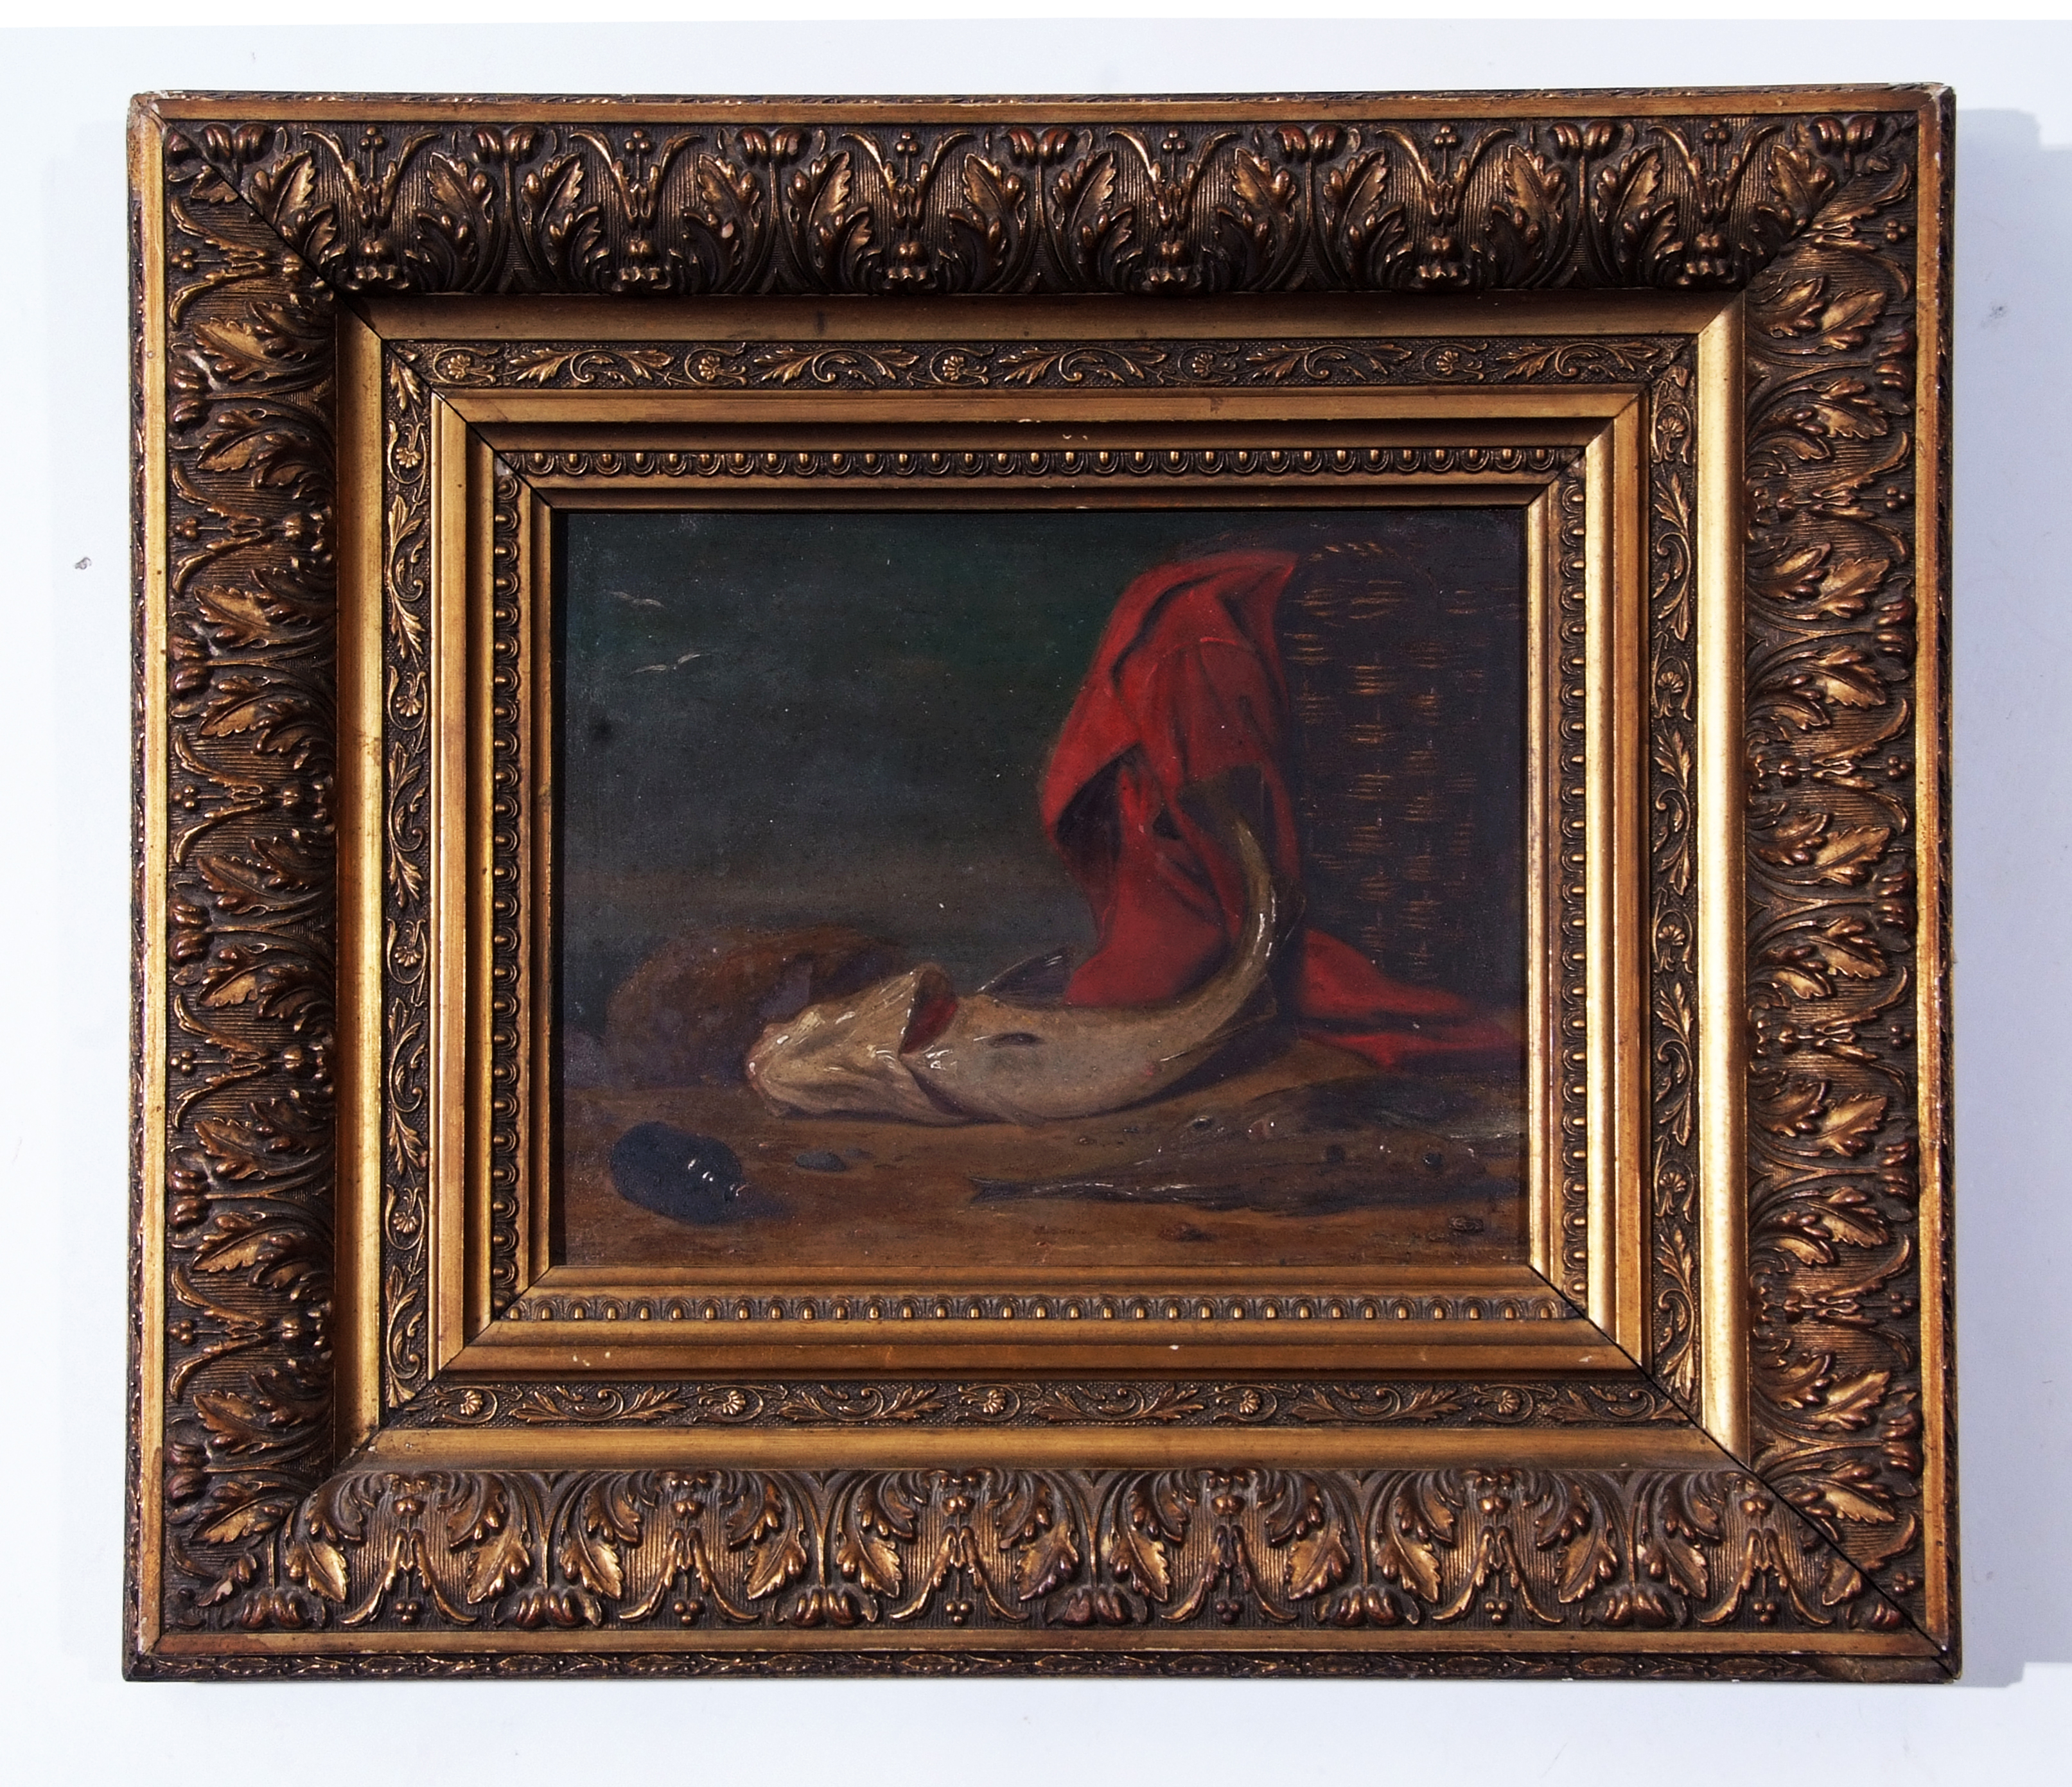 Attributed to Alfred Stannard (1806-1889),Still life study of fish and basket, oil on panel,18 x